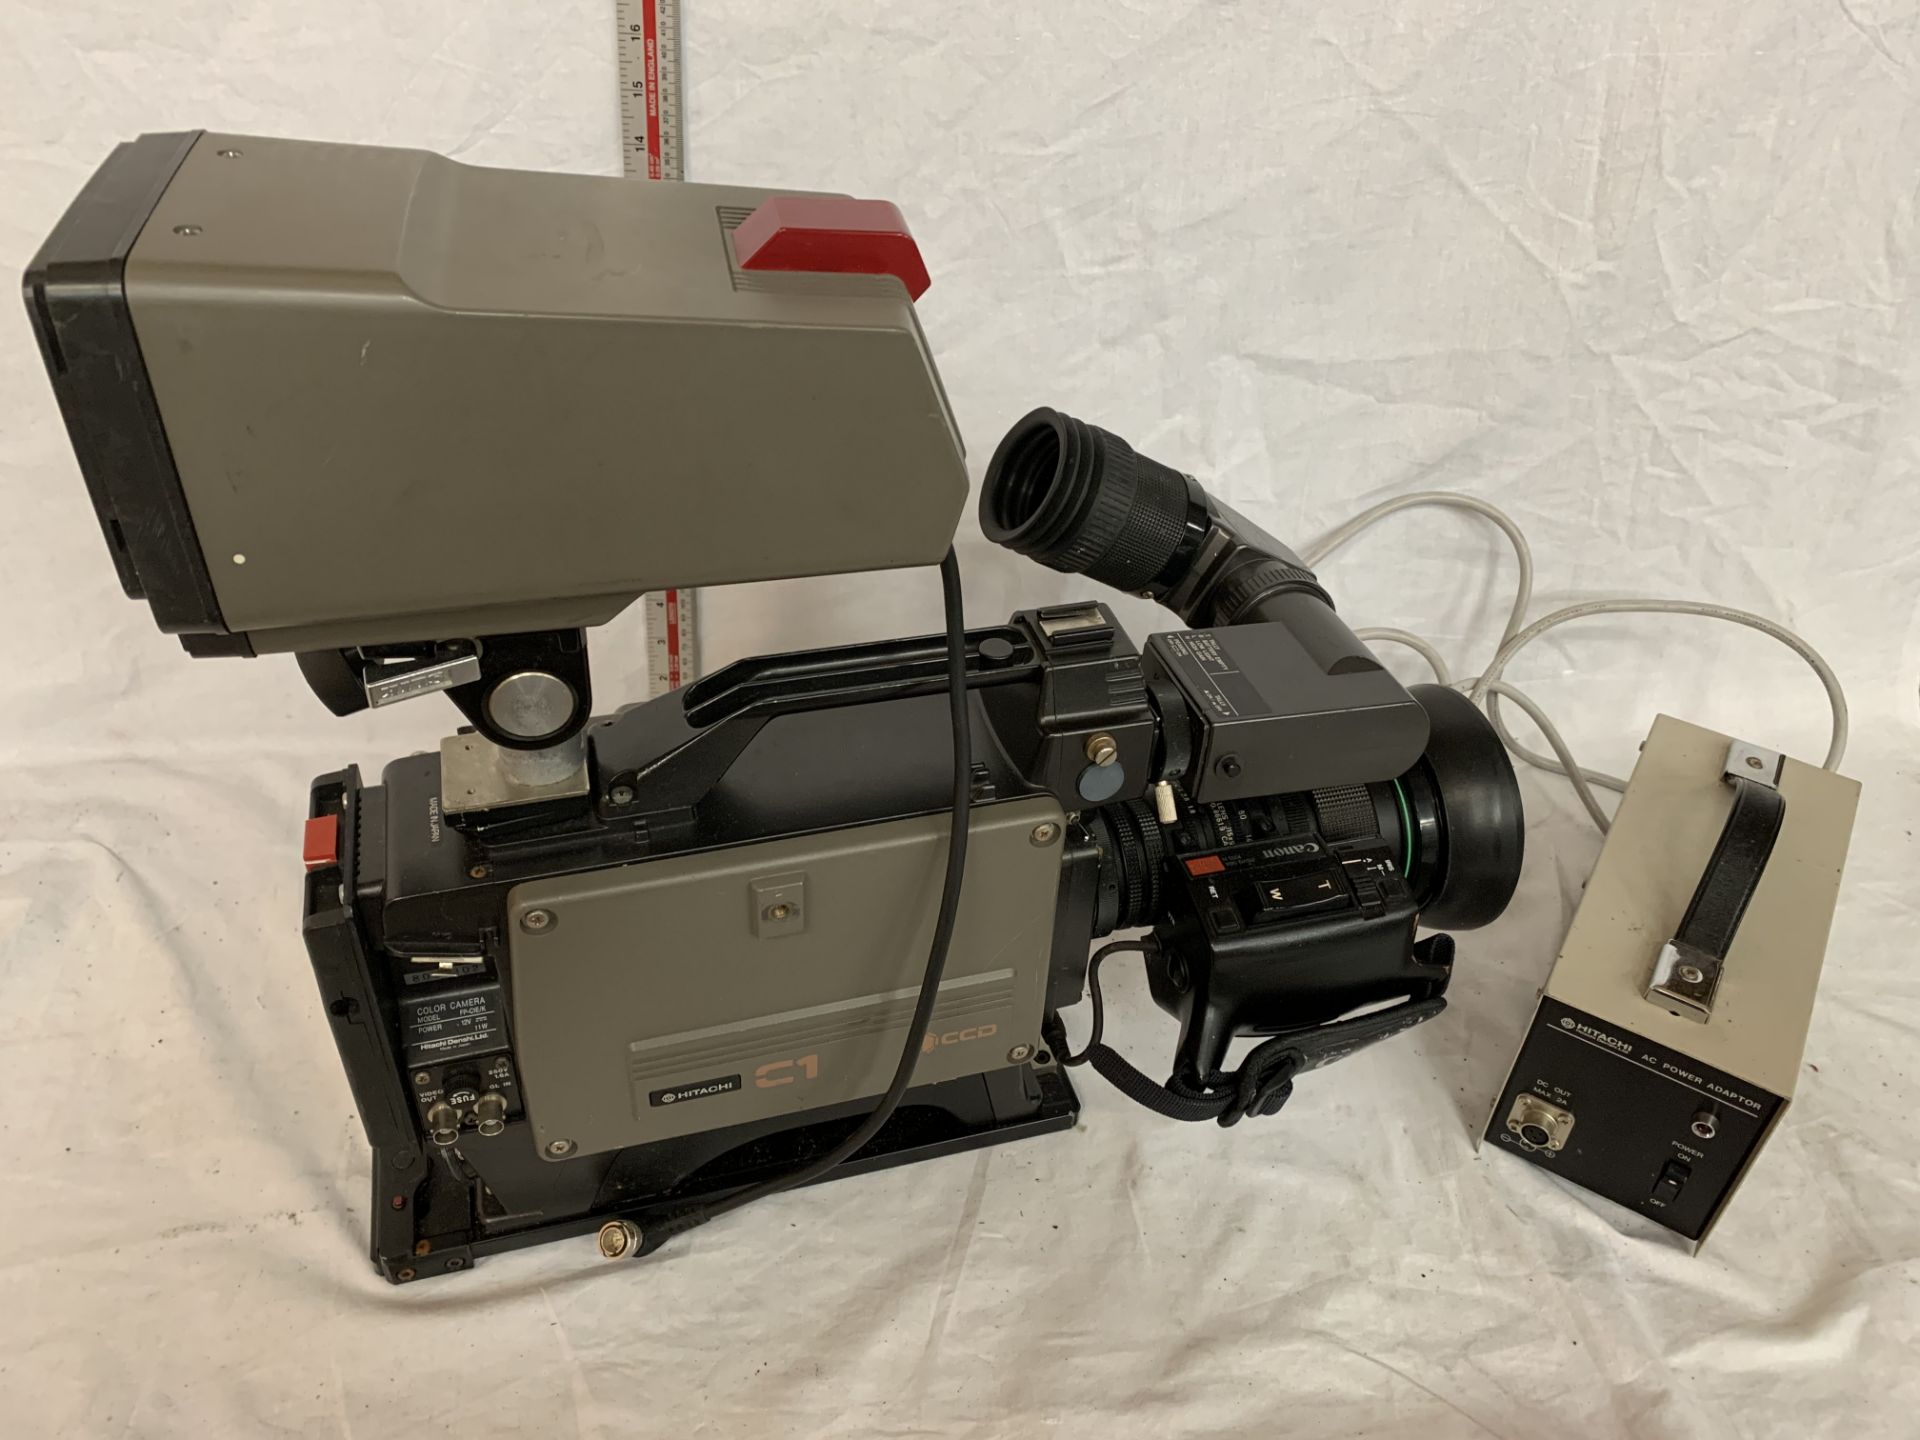 A HITACHI C1 BROADCAST CAMERA WITH ATTACHED SCREEN AND POWER PACK - Image 3 of 5